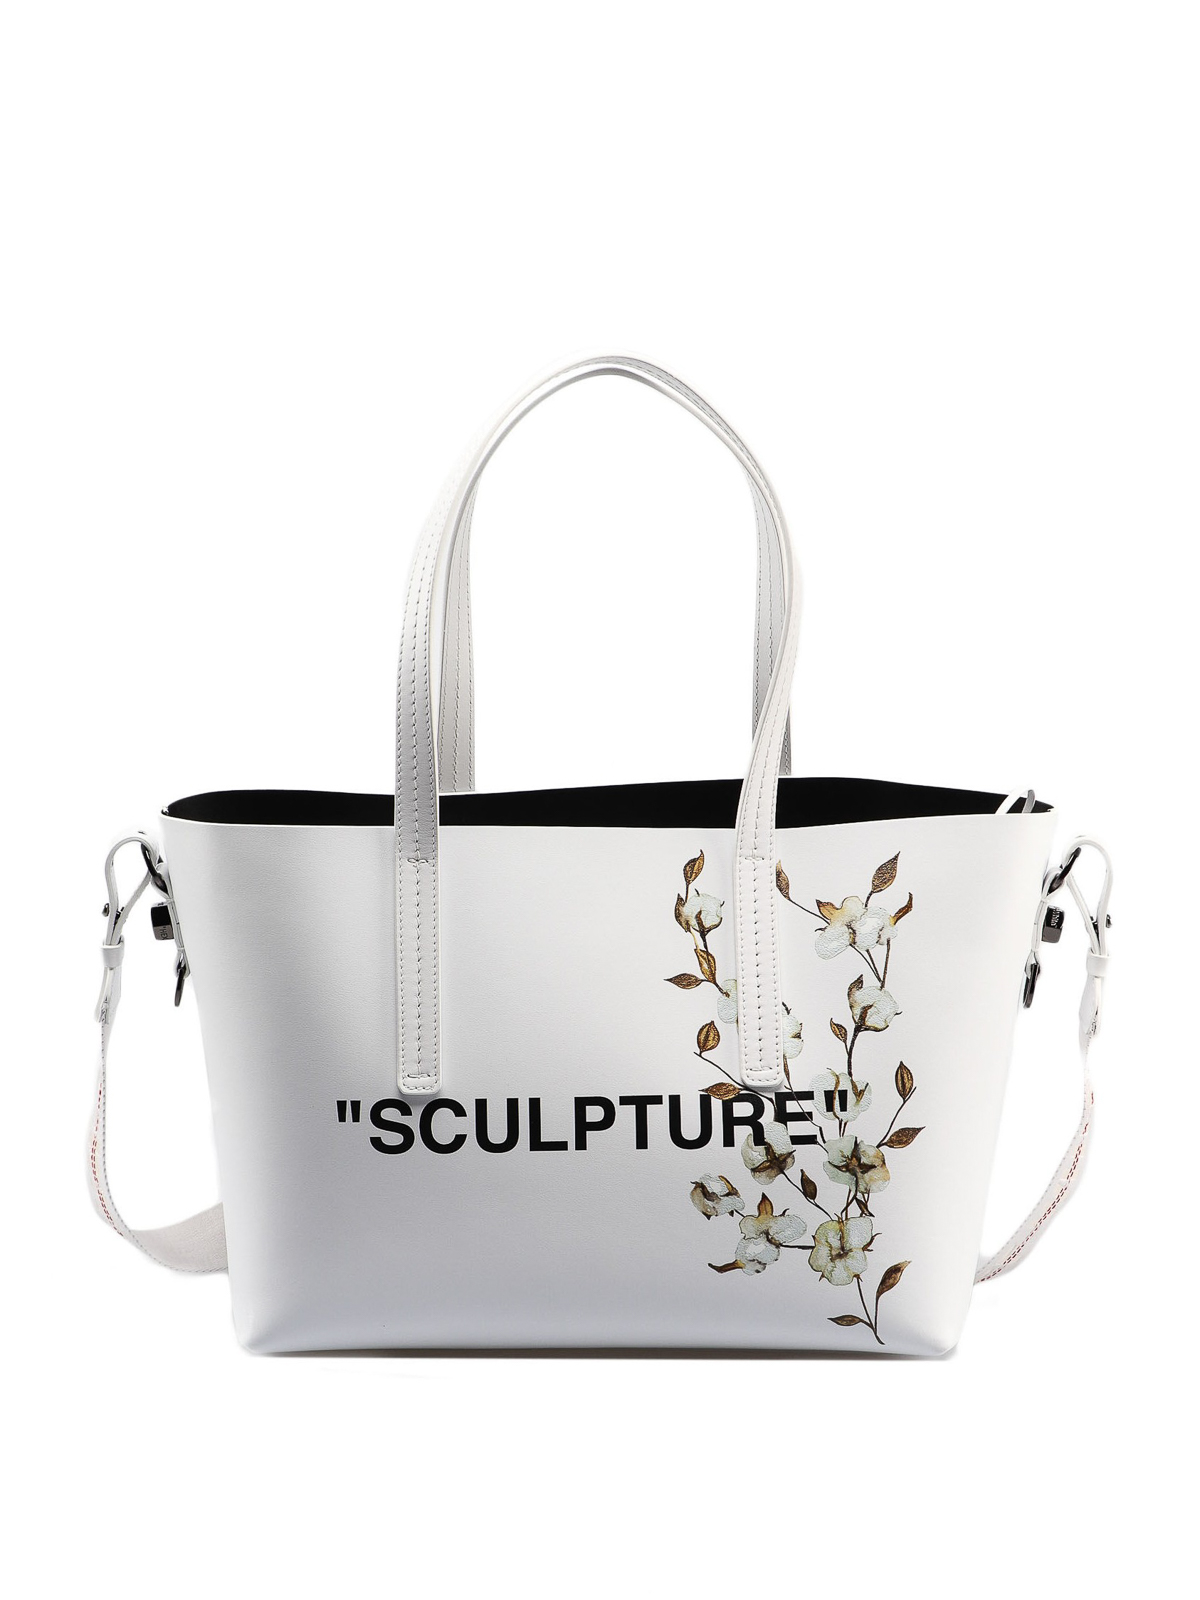 Totes bags Off-White - Sculpture floral print shopping bag -  OWNA025R197790850110